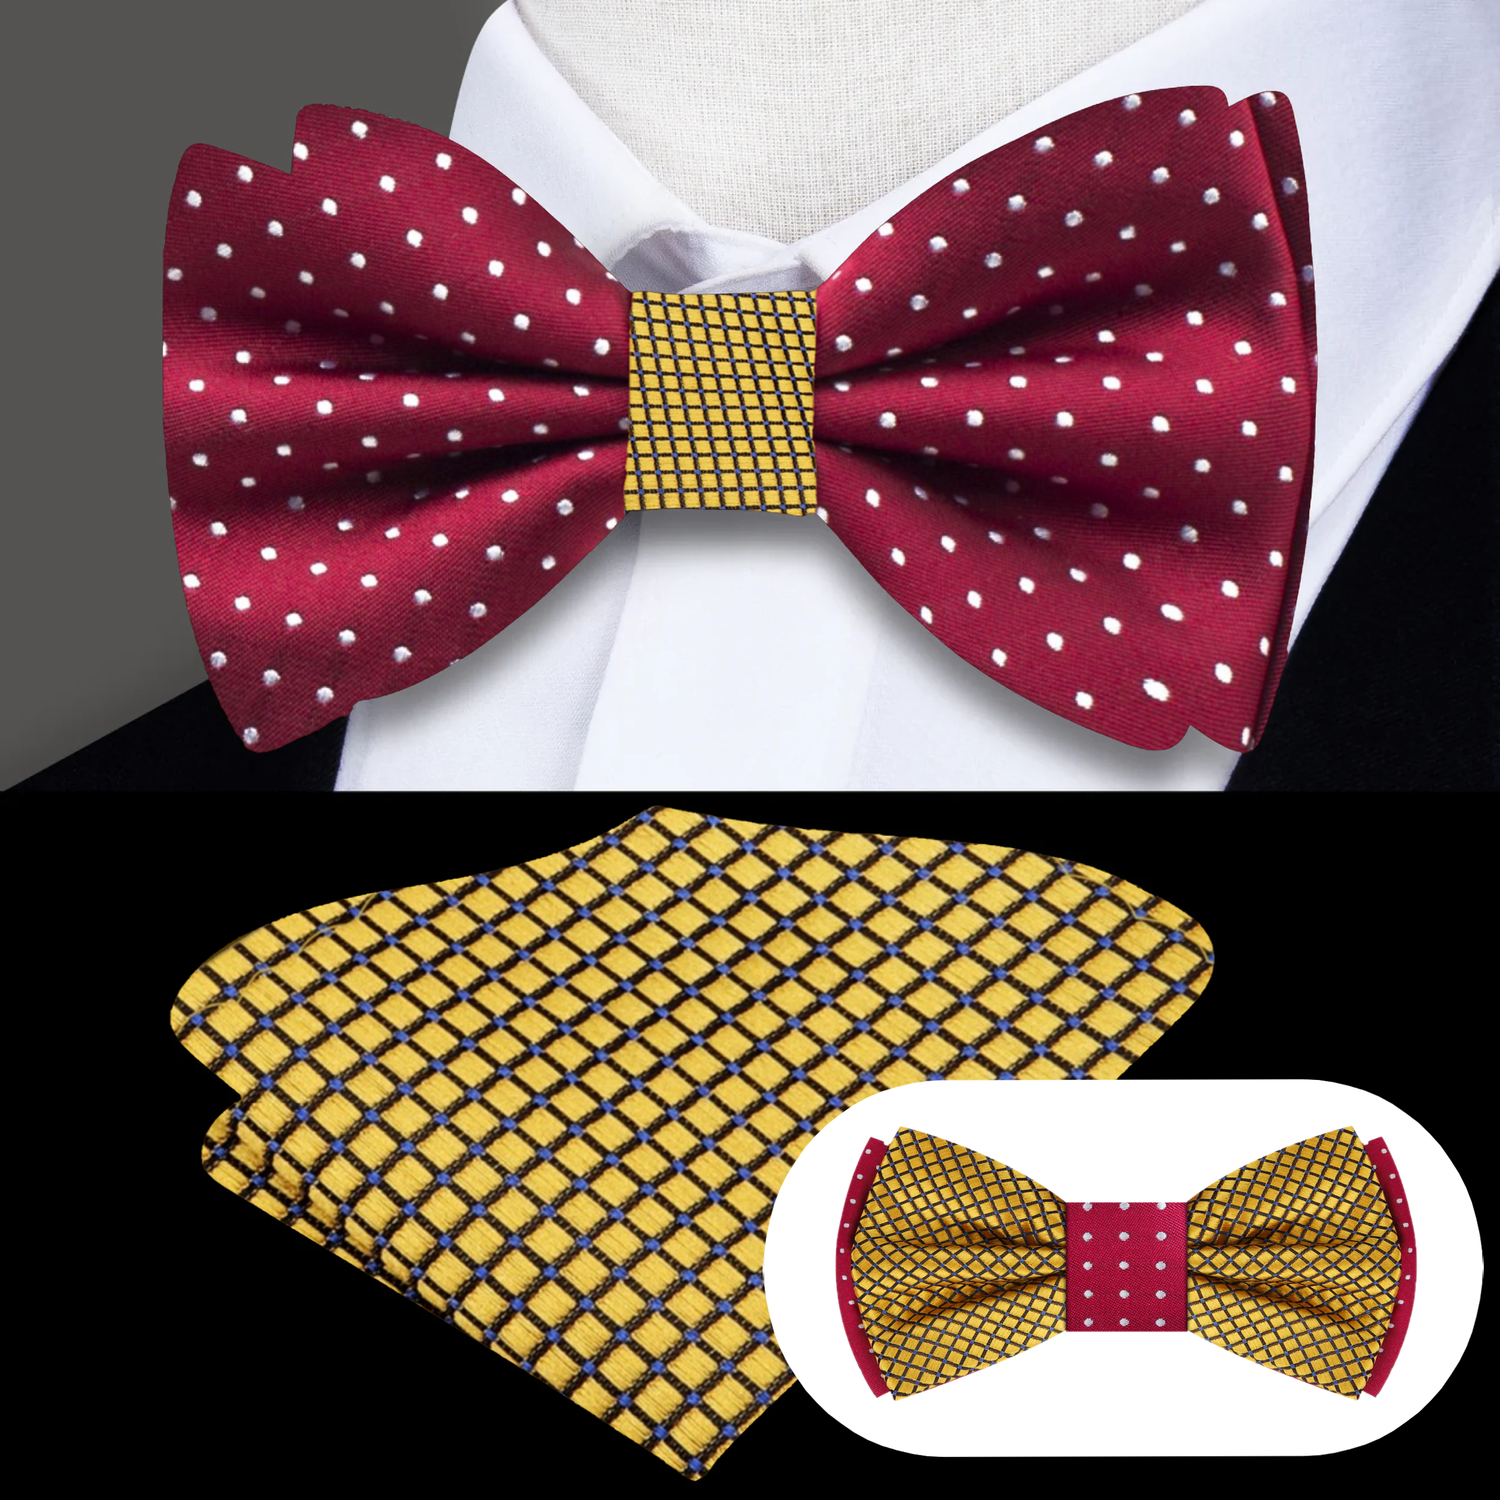 Both View: Cranberry Polka Bow Tie with Square